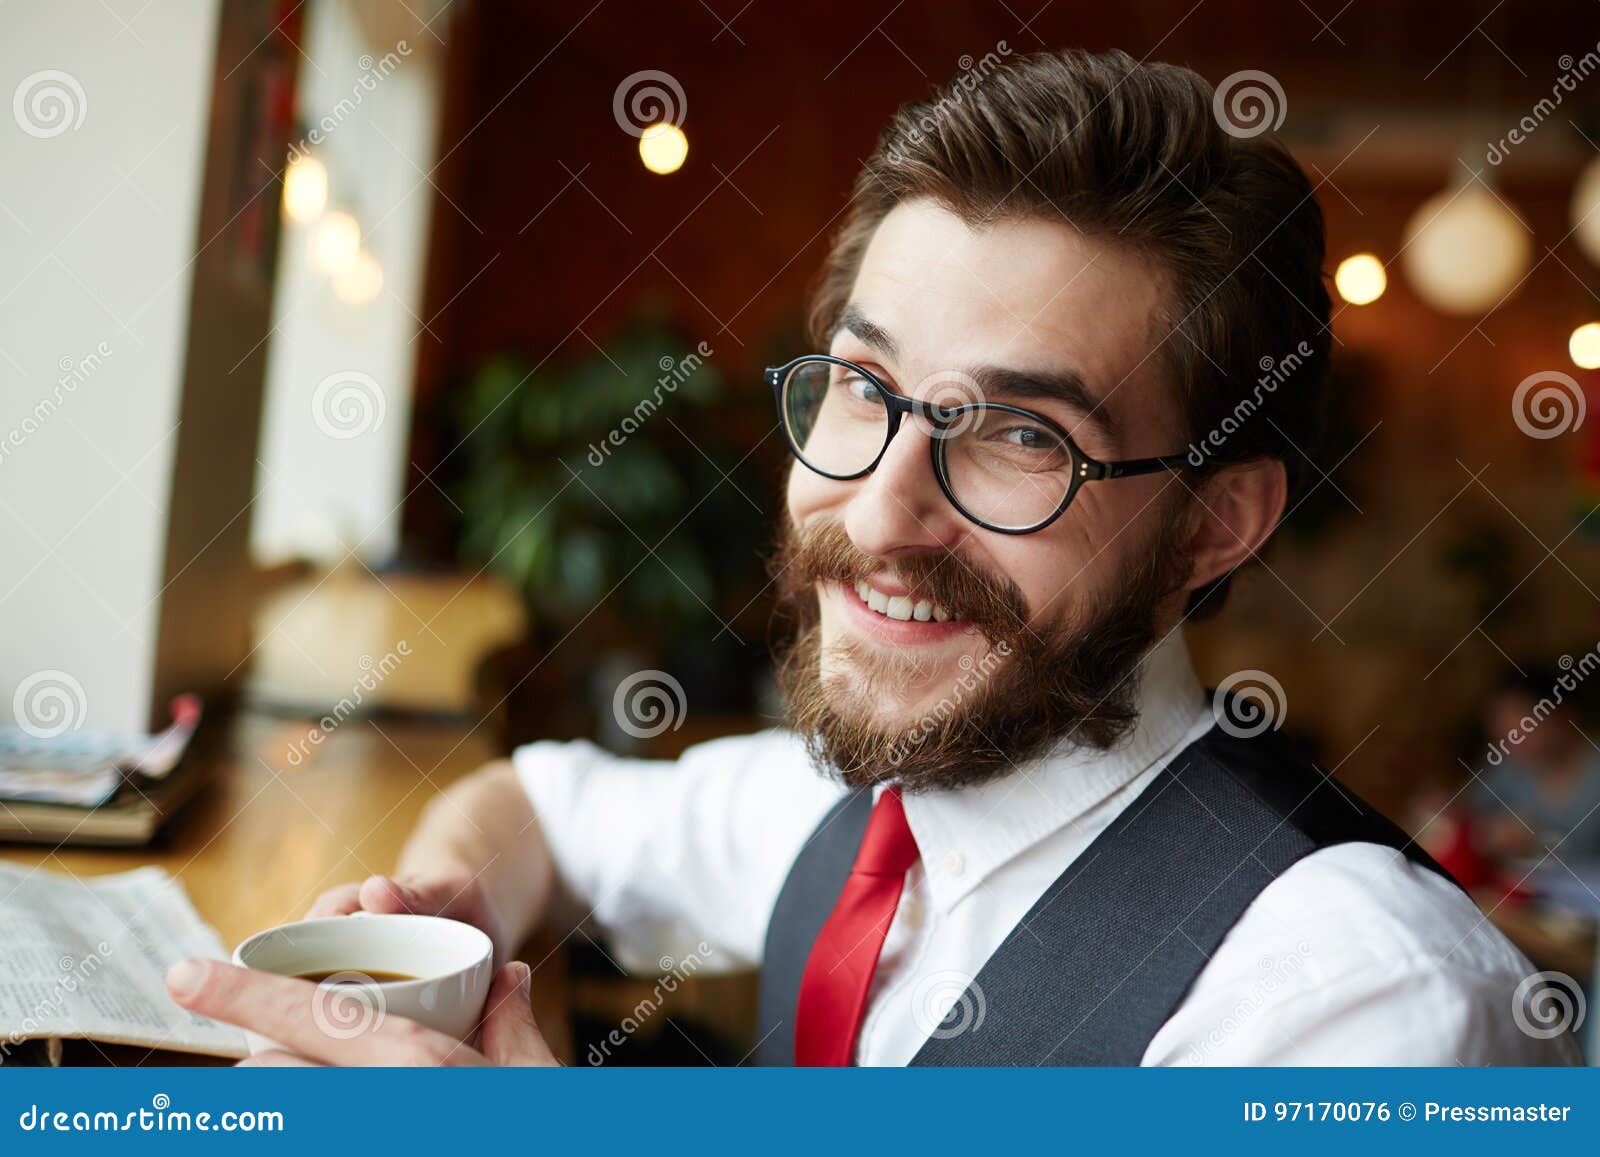 Man in cafe stock photo. Image of owner, young, coffeebreak - 97170076